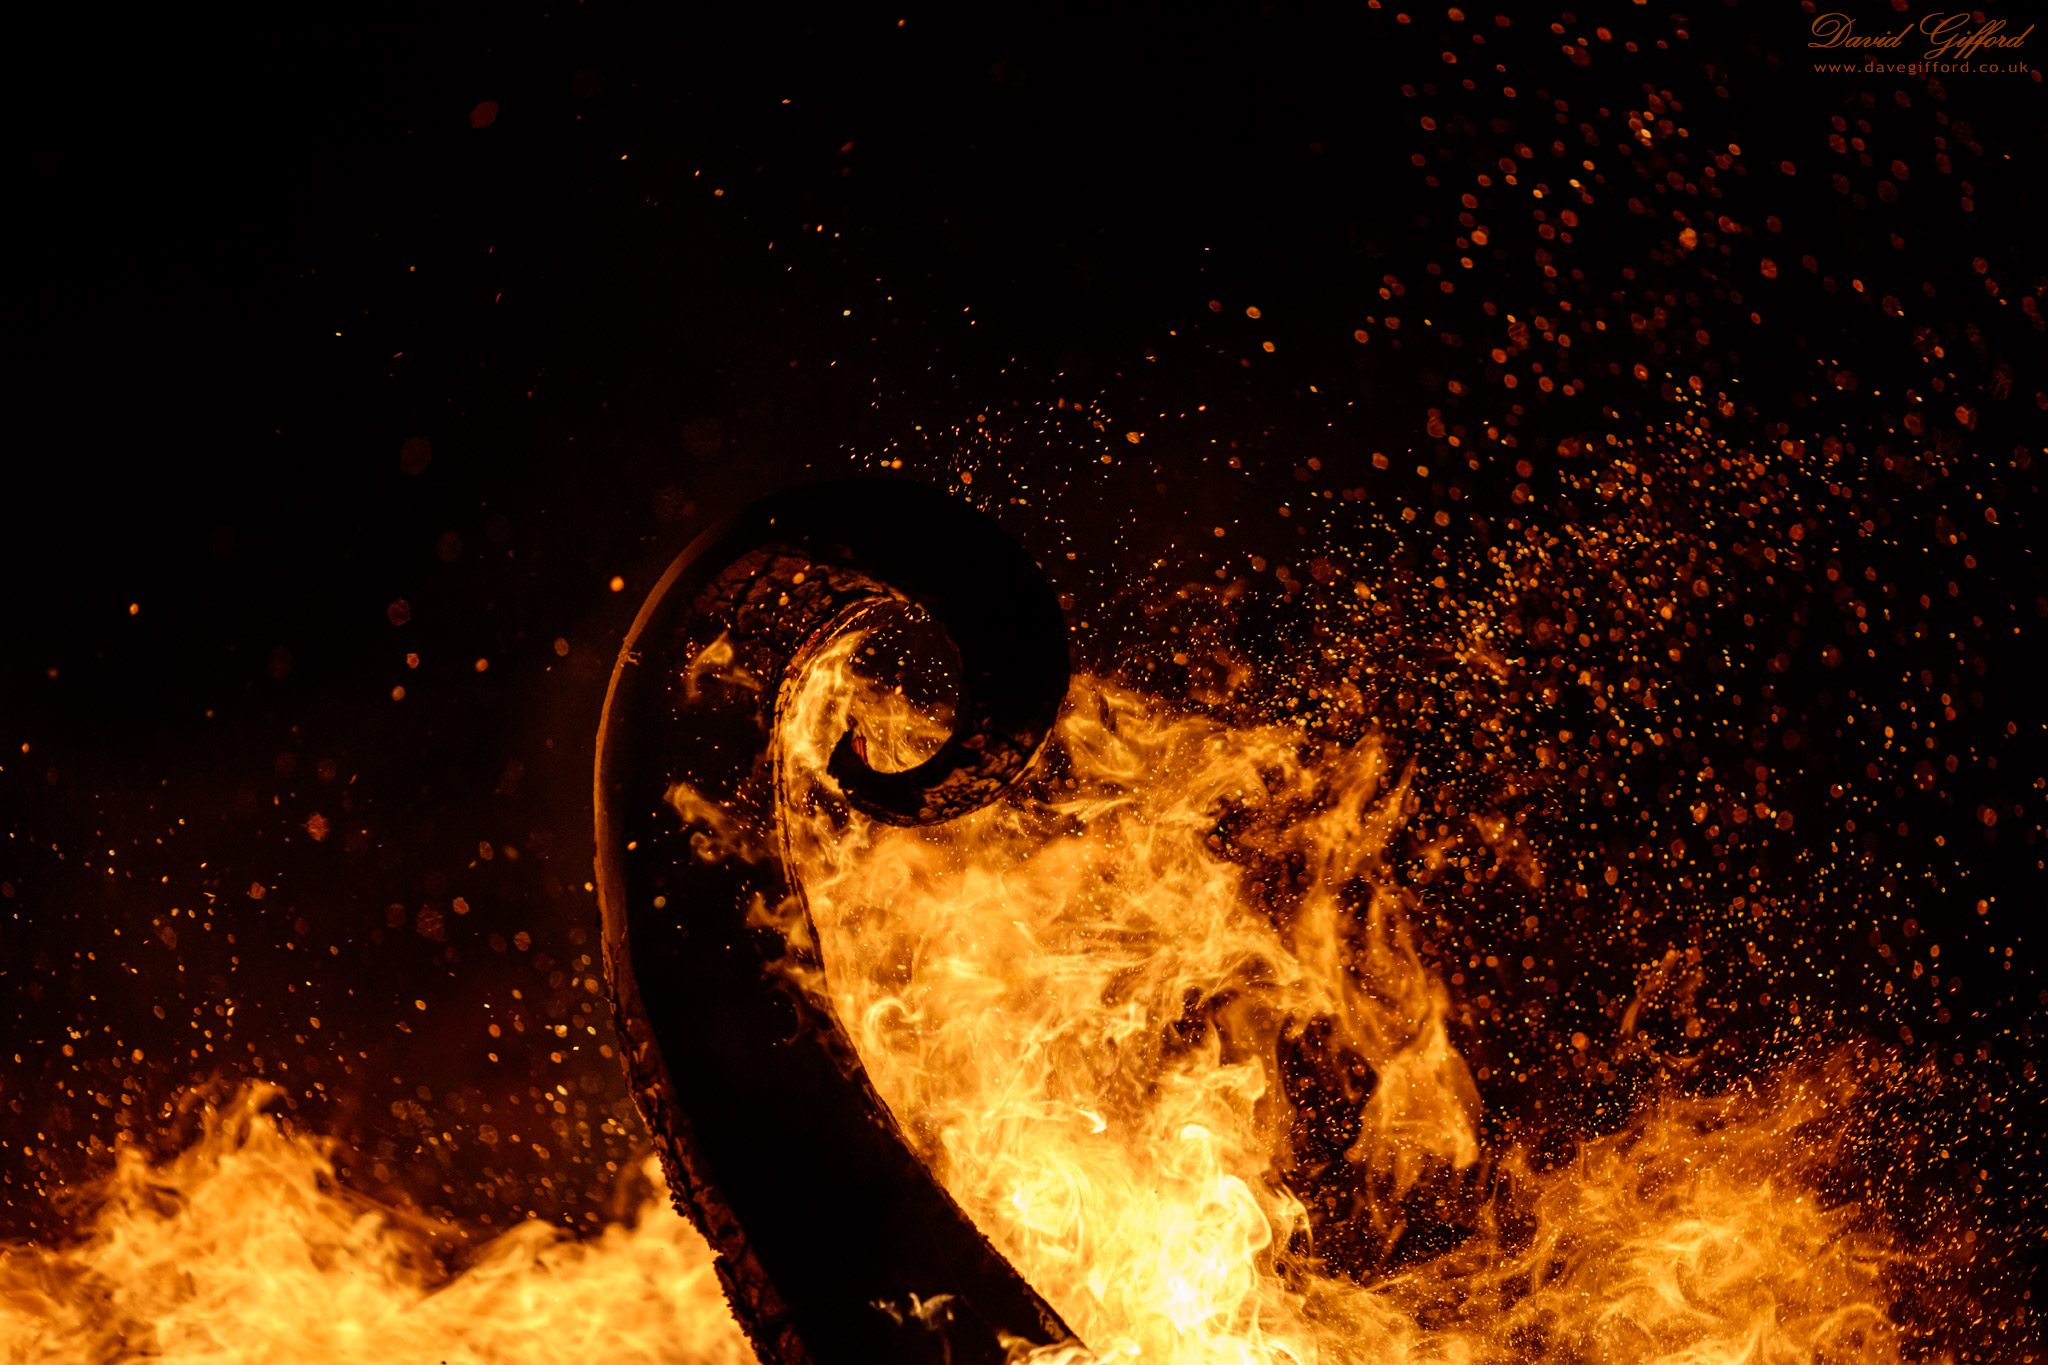 Photo: Nesting and Girlsta Up Helly Aa 2020: Dragon Tail